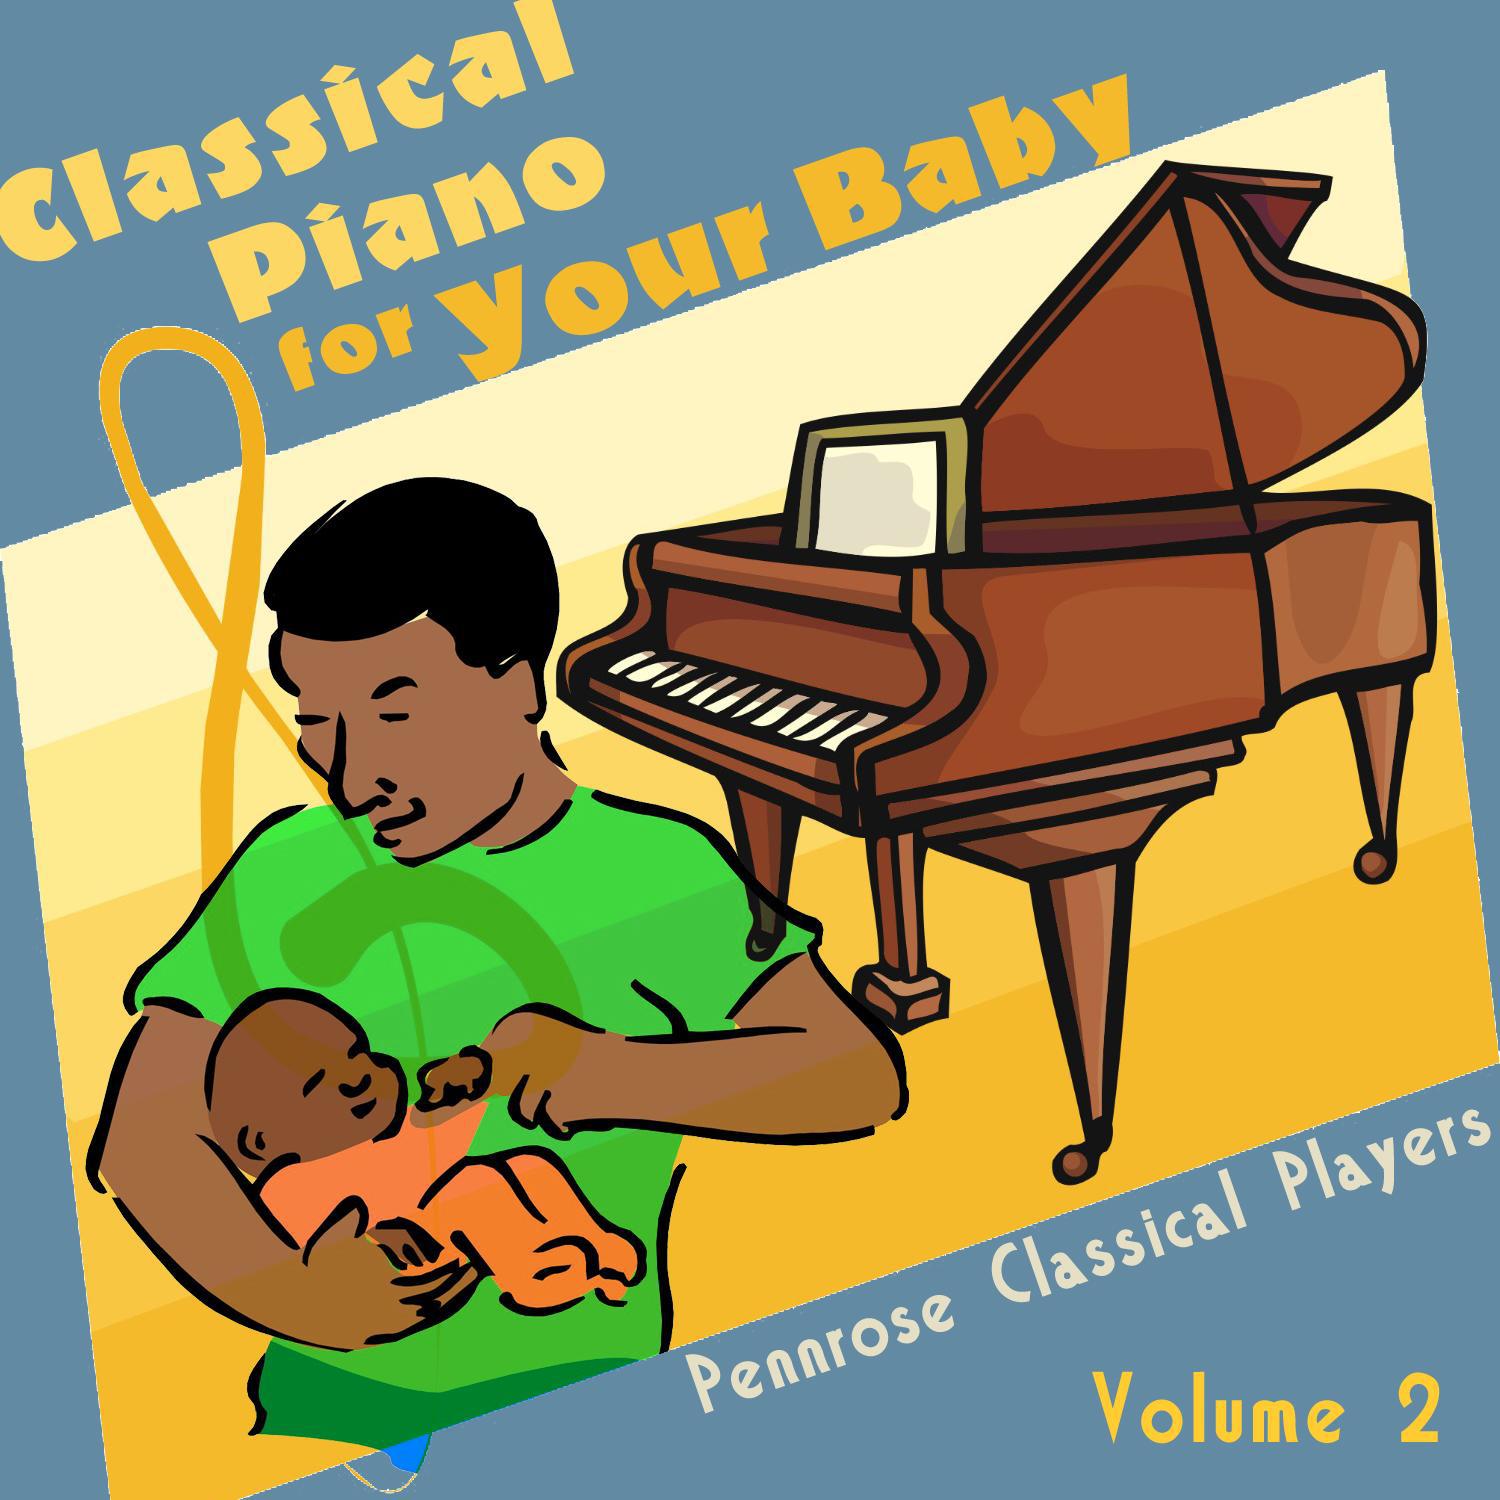 Classical Piano for Your Baby Volume 2